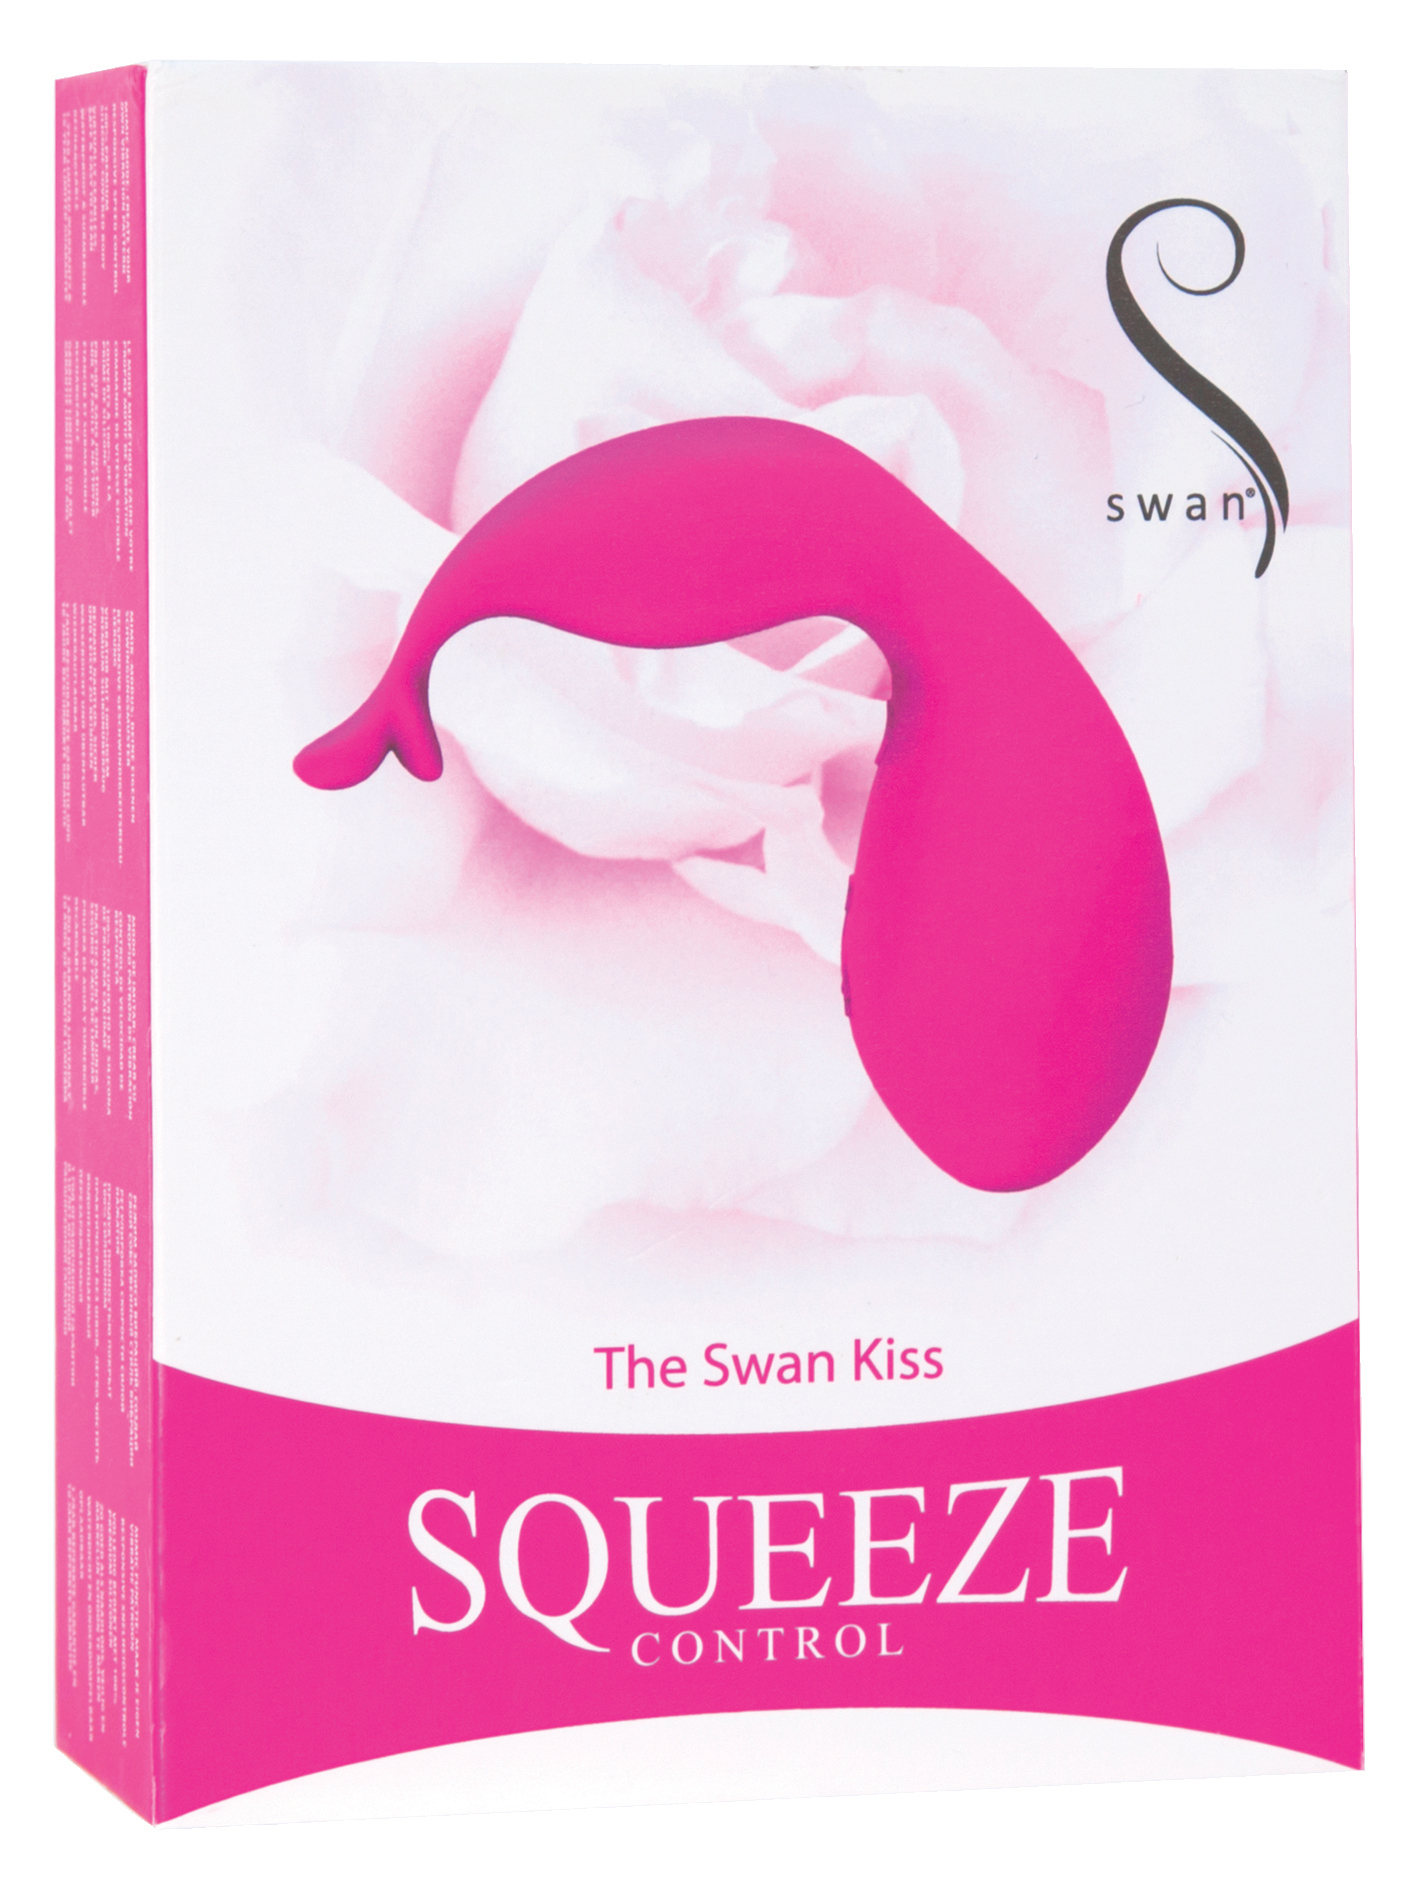 SQUEEZE CONTROL - The Swan Kiss pink